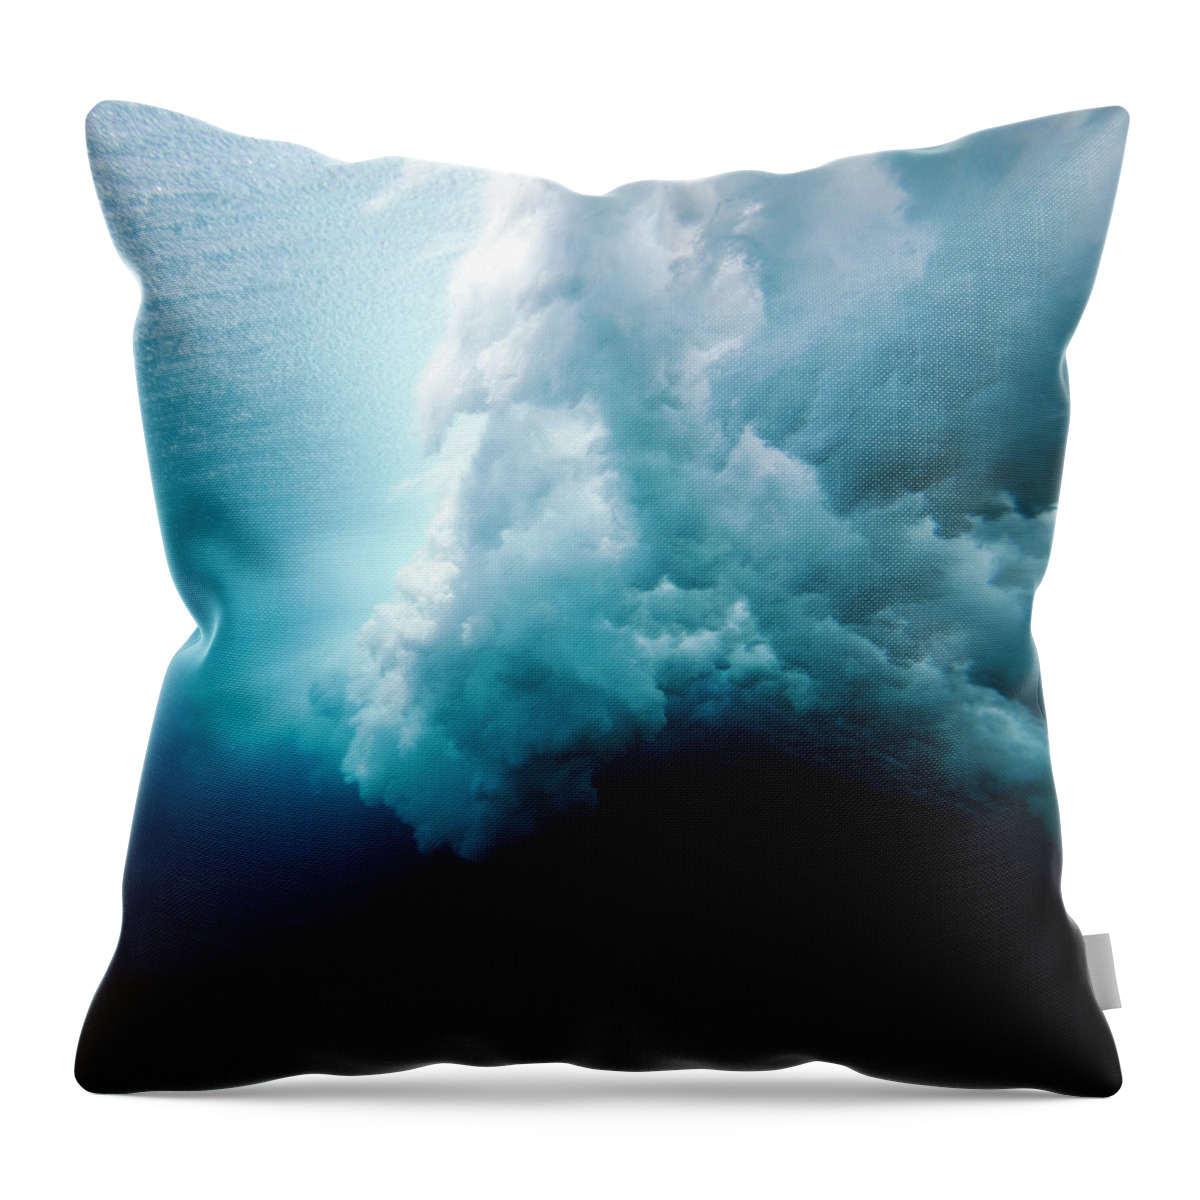 Underwater Throw Pillow featuring the photograph Wave Crashing Underwater by Subman